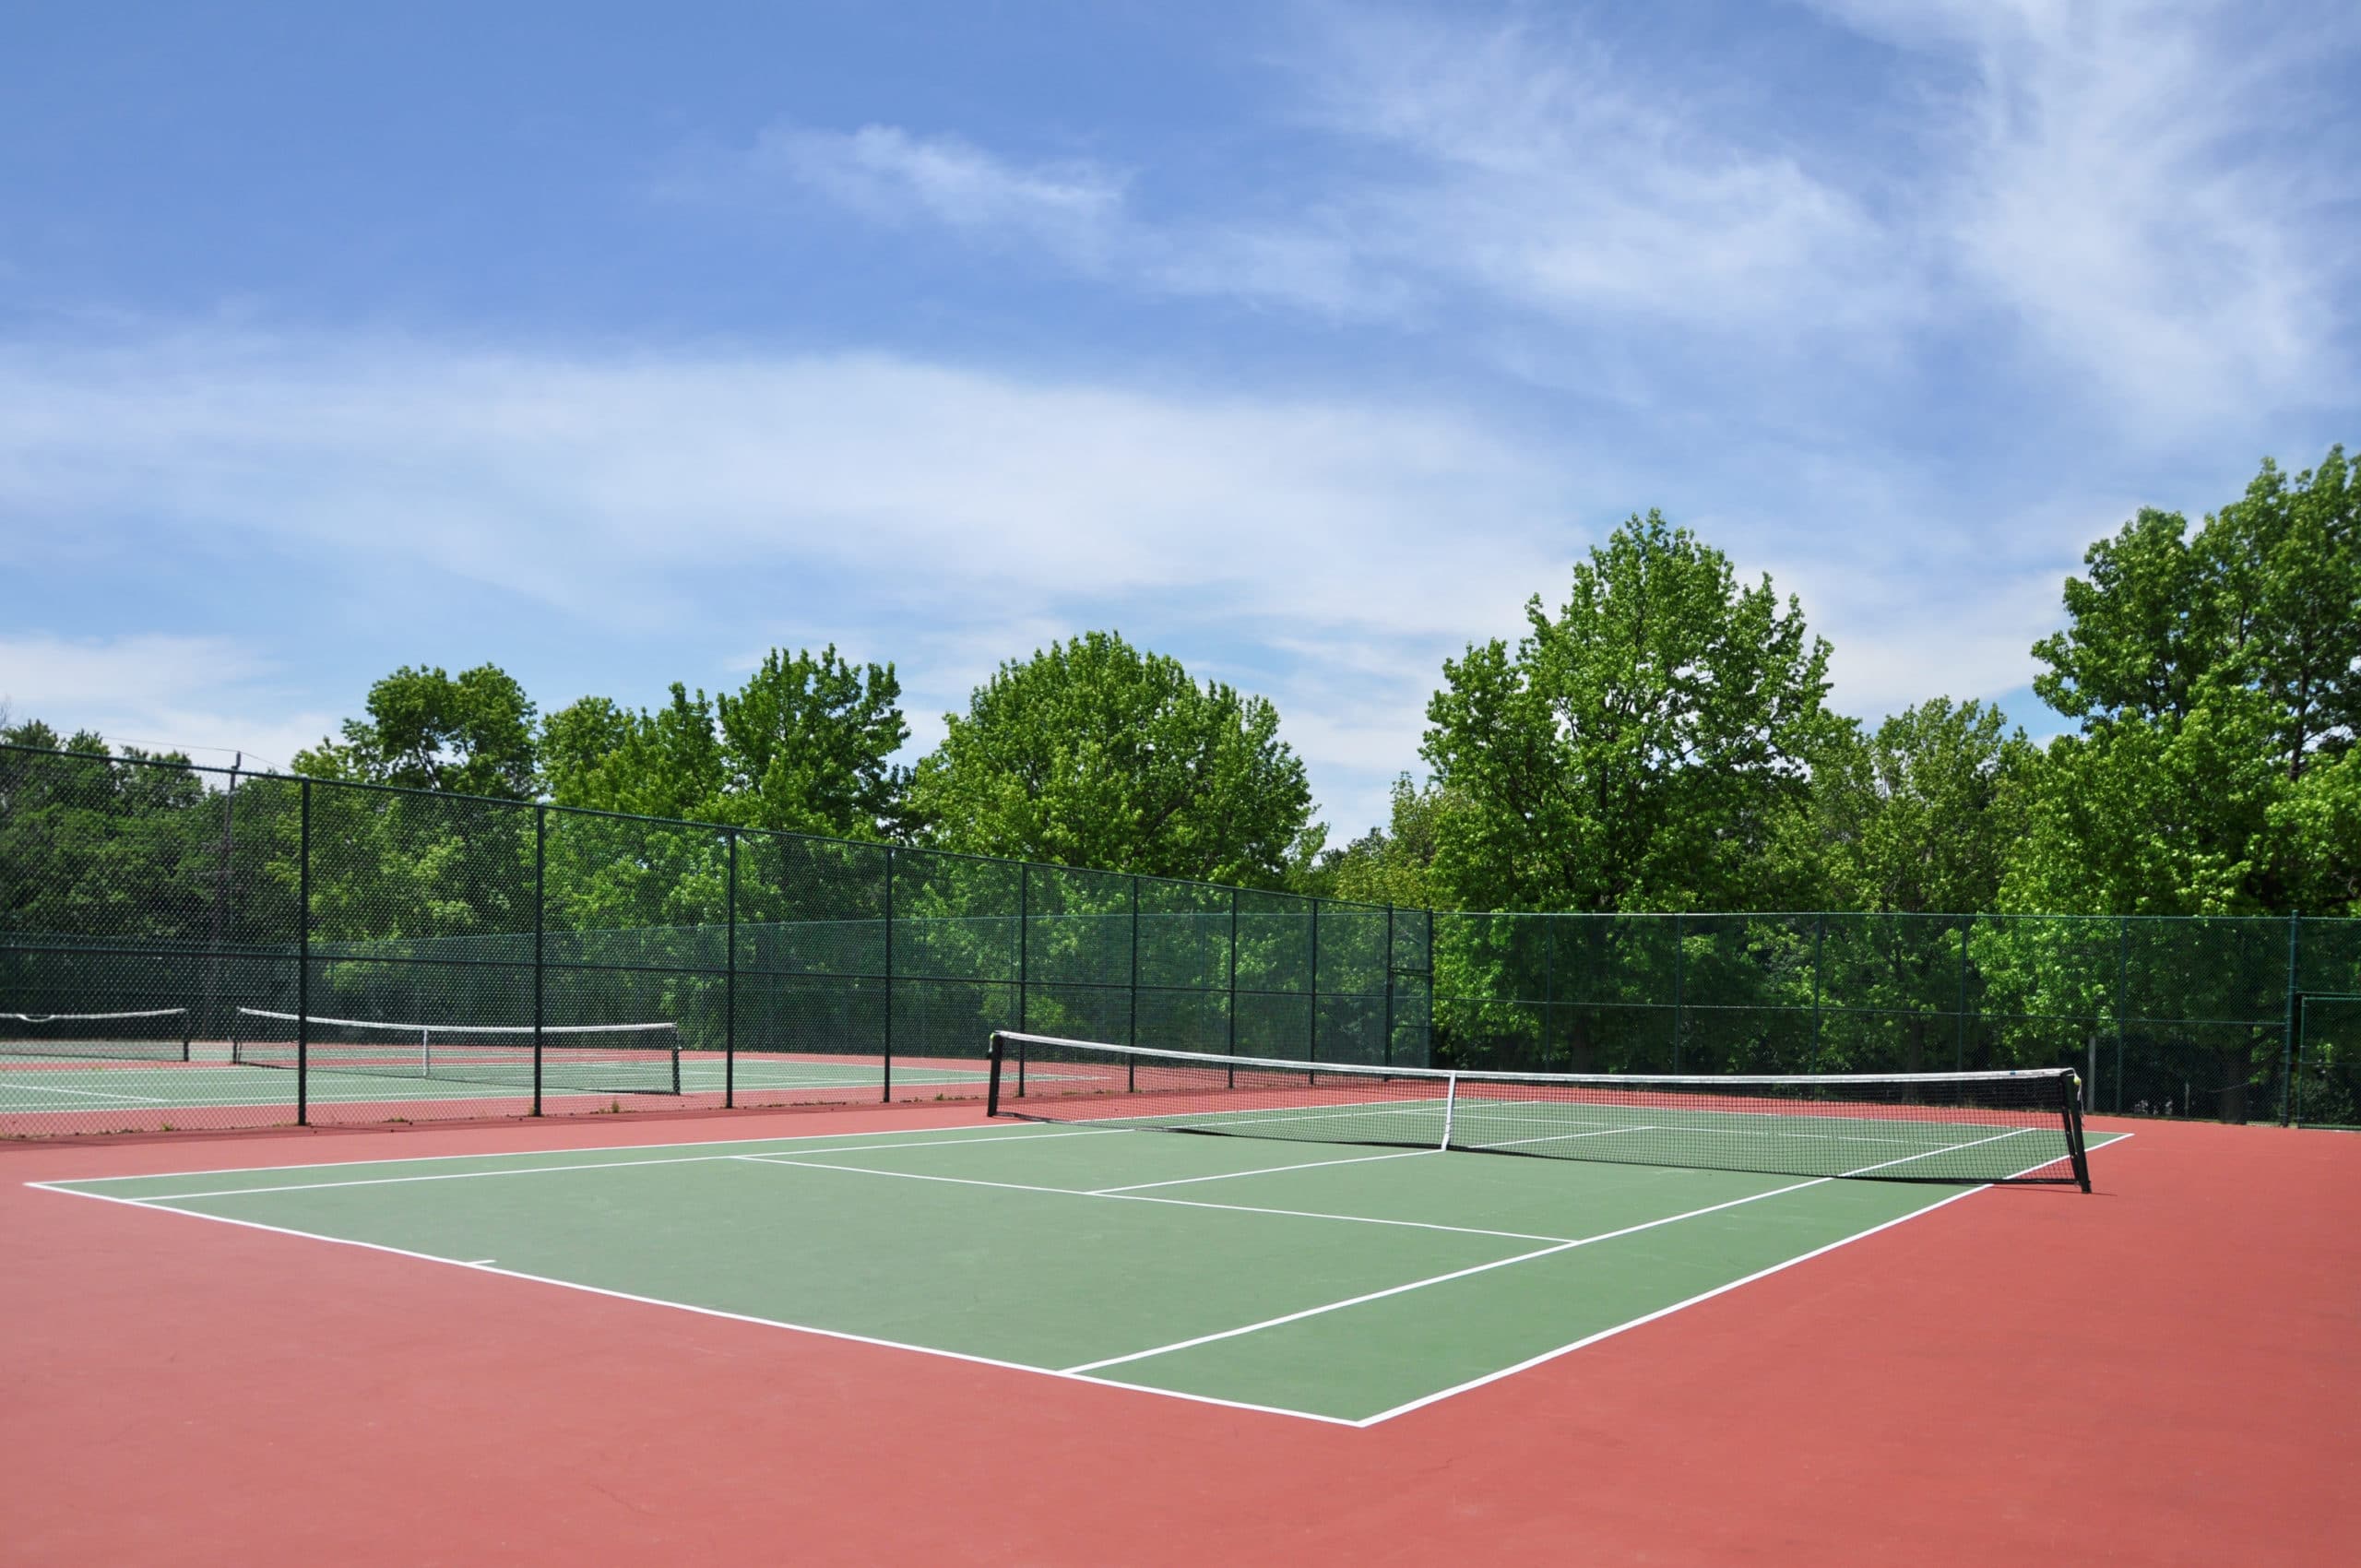 A residential tennis court surrounded by trees.